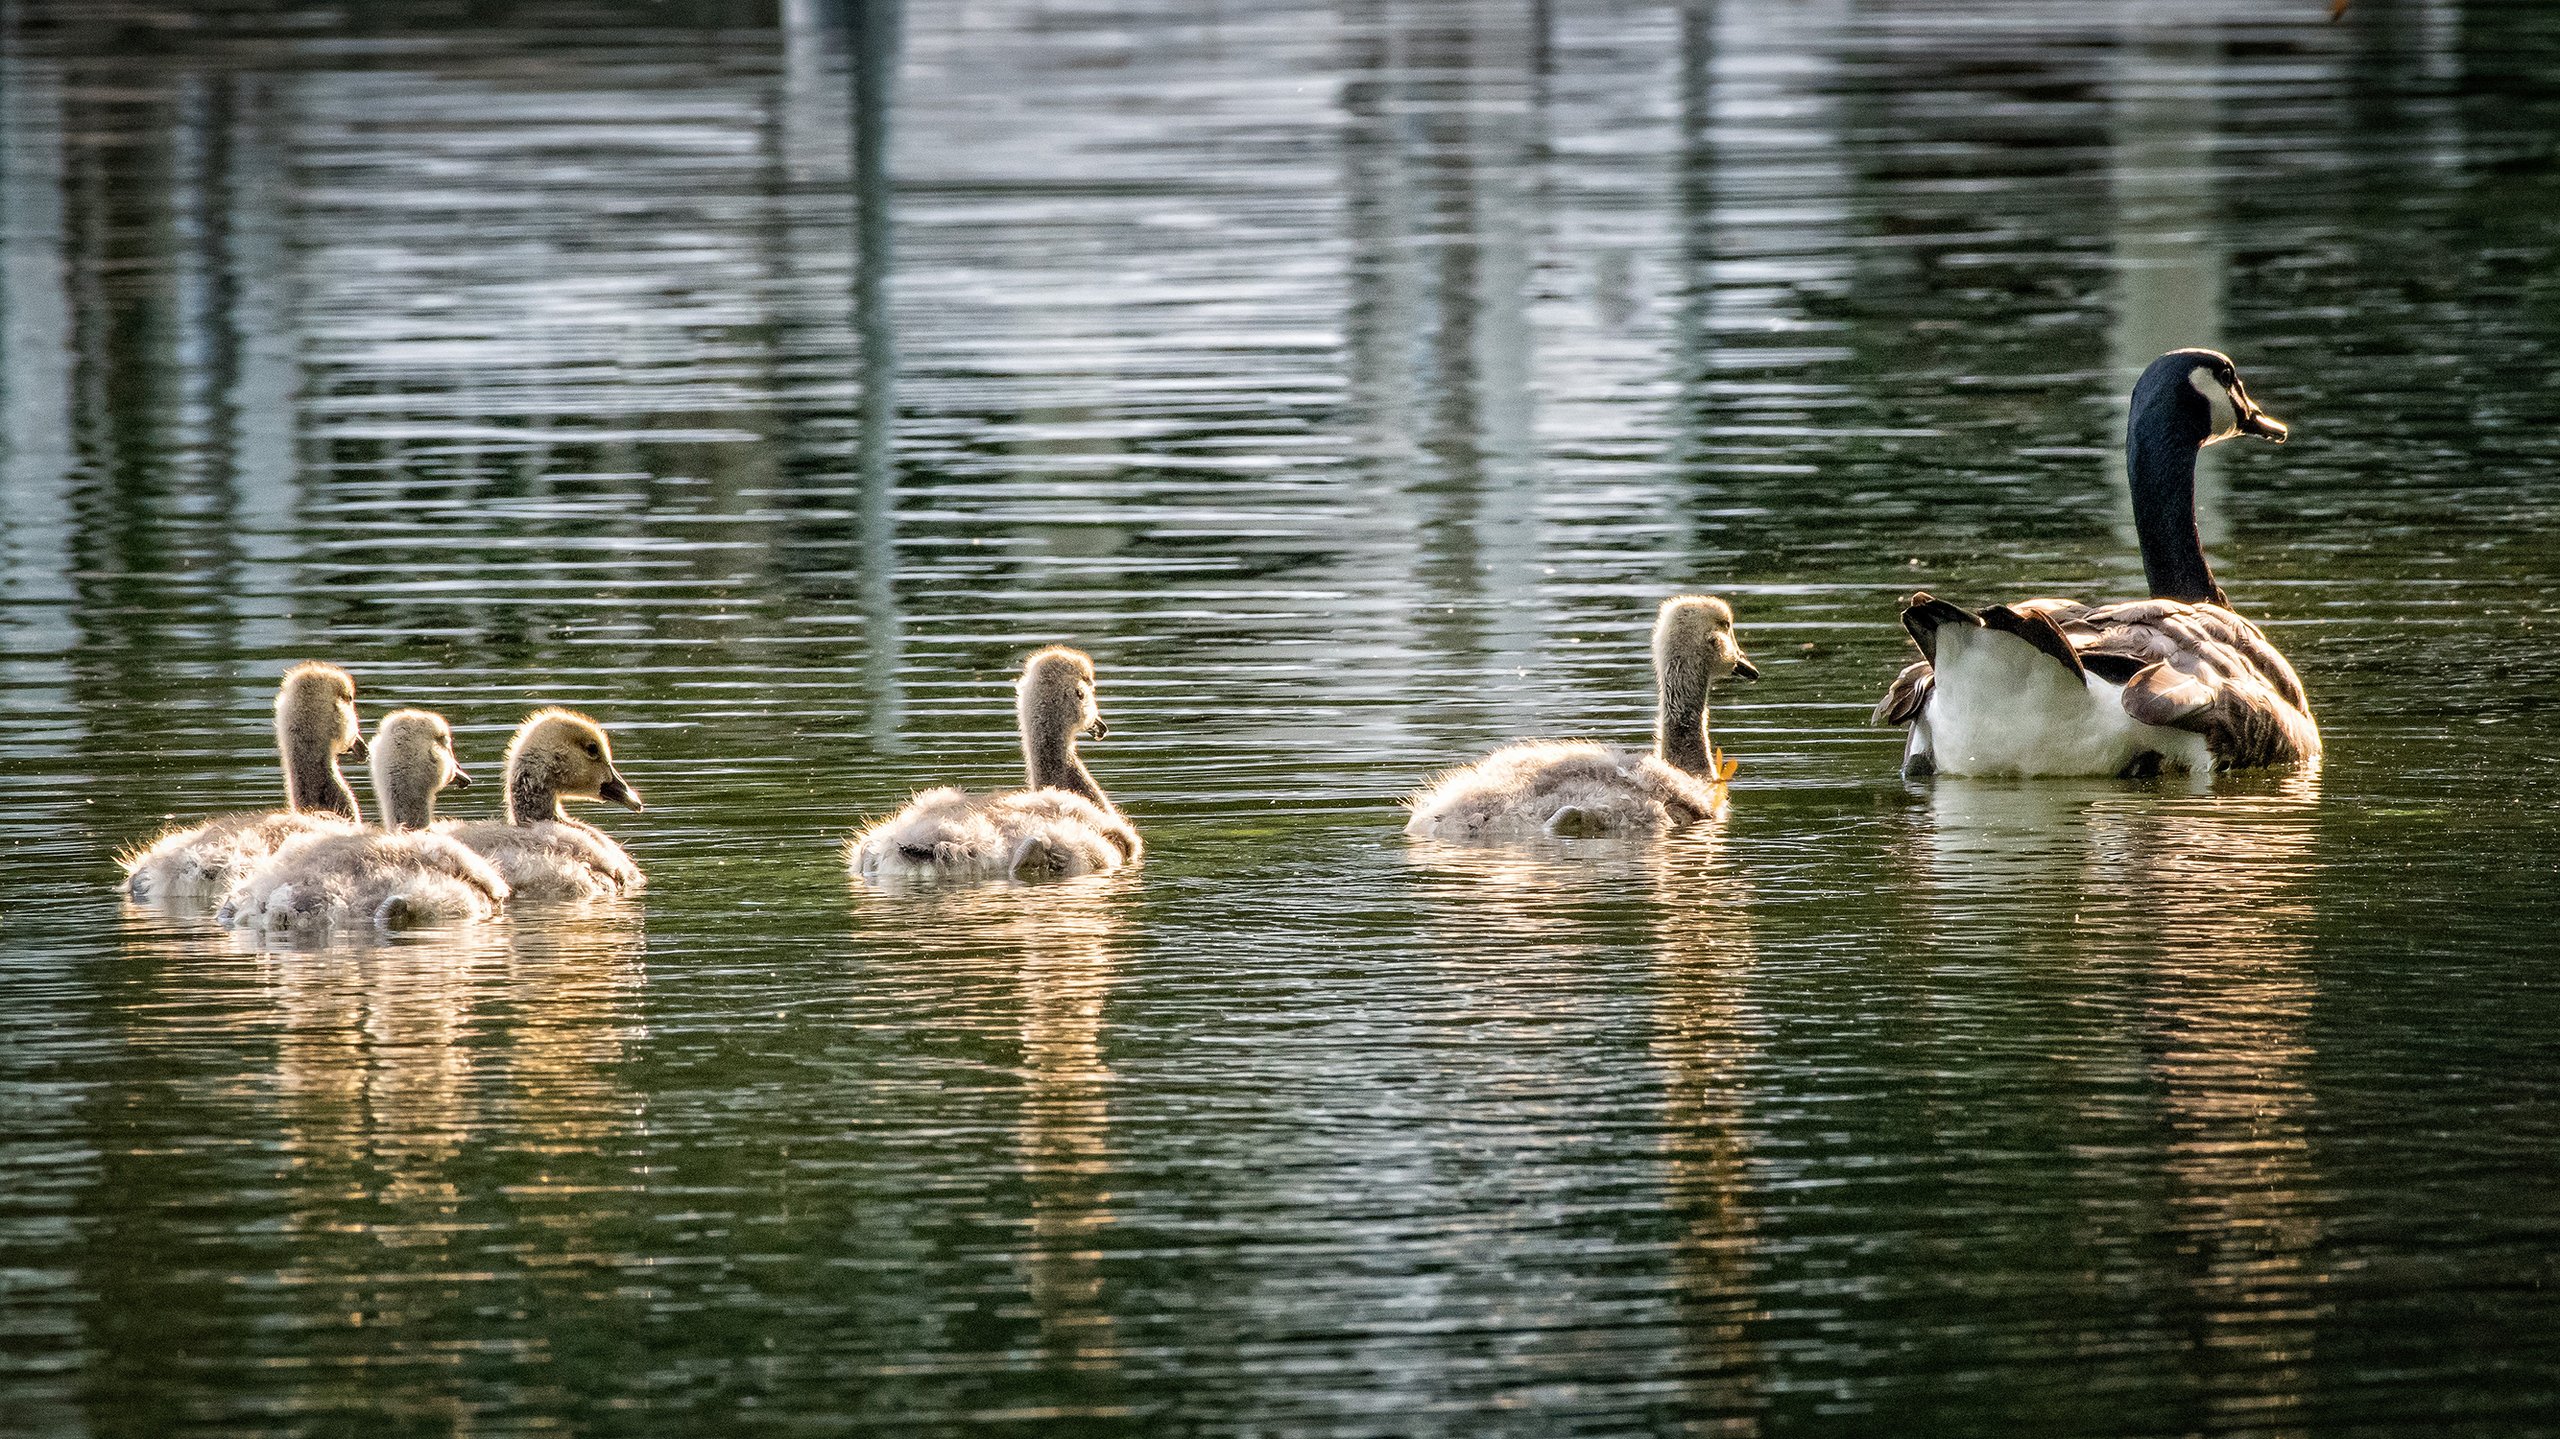 Canadian goslings follow behind their mother on water at Bird Lake in the Philadelphia Zoo.